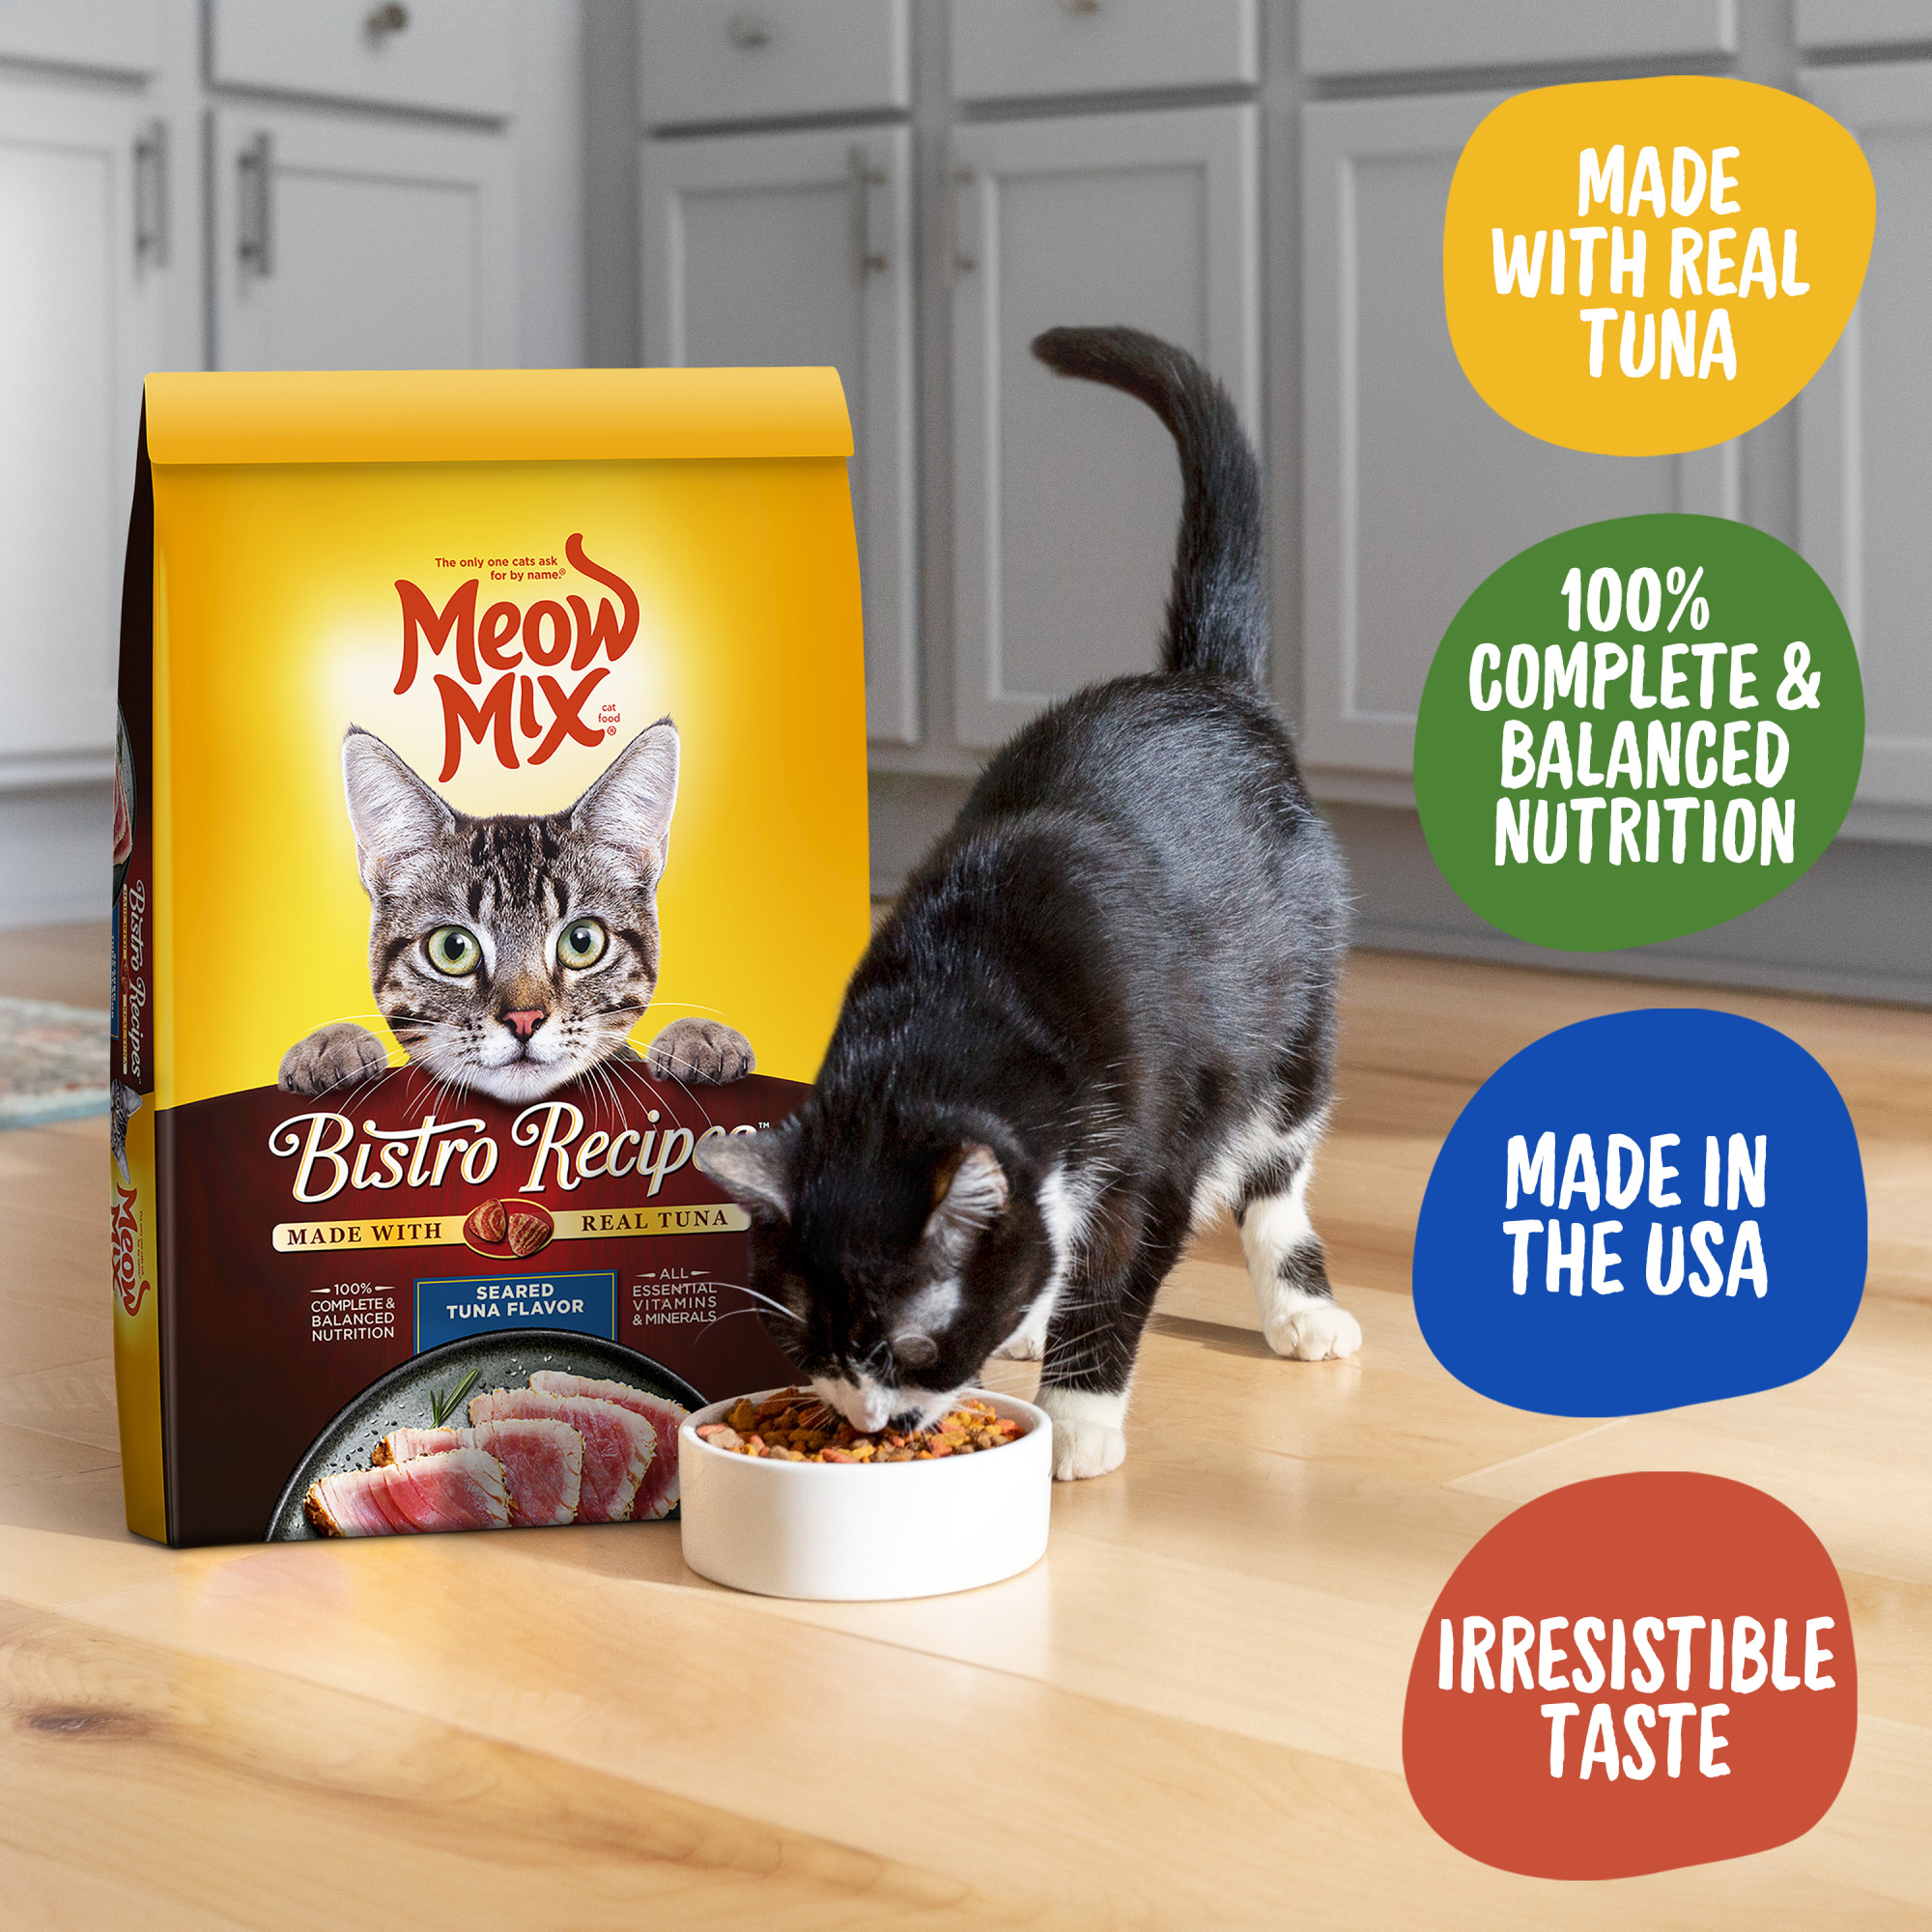 Meow Mix Bistro Recipes Seared Tuna Flavor Dry Cat Food - image 4 of 6